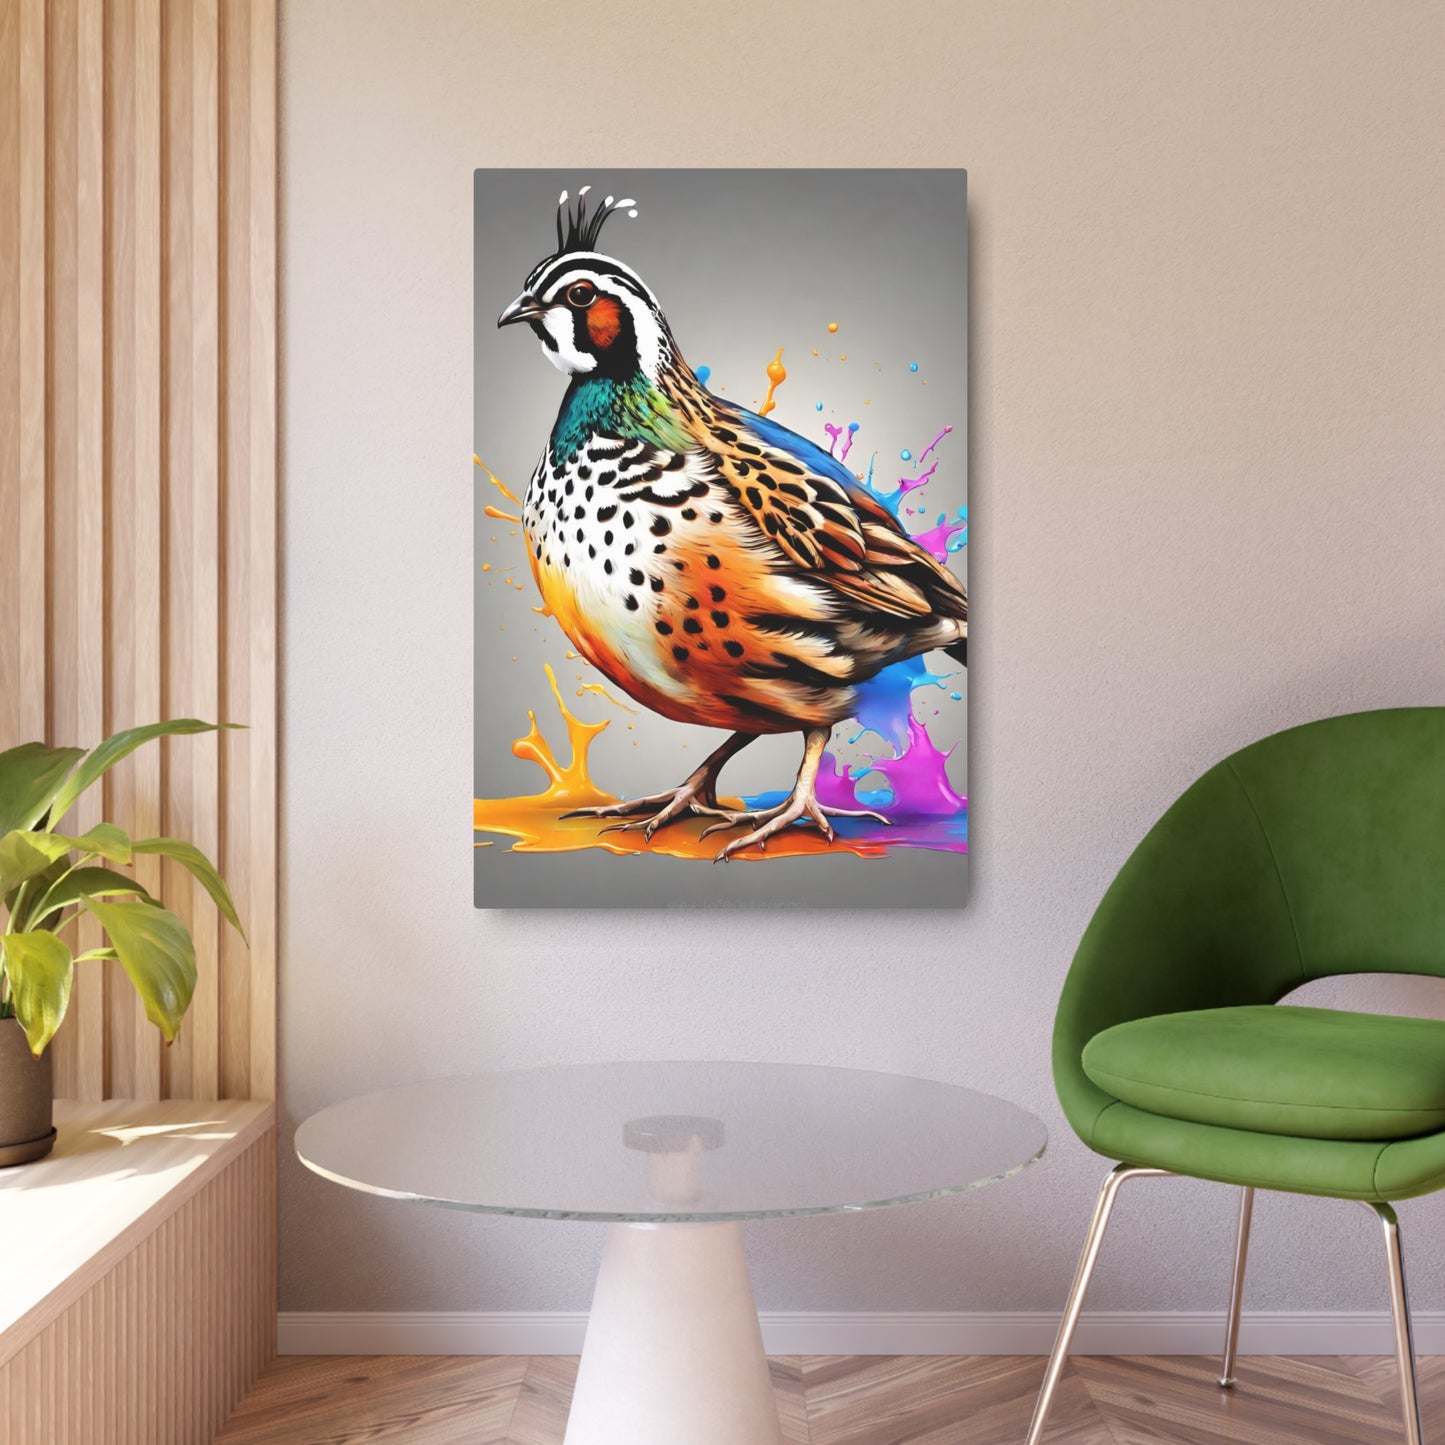 Metal Wall Art Decor featuring a Colorful Quail. Mounting tools included. Versatile Home Decor.